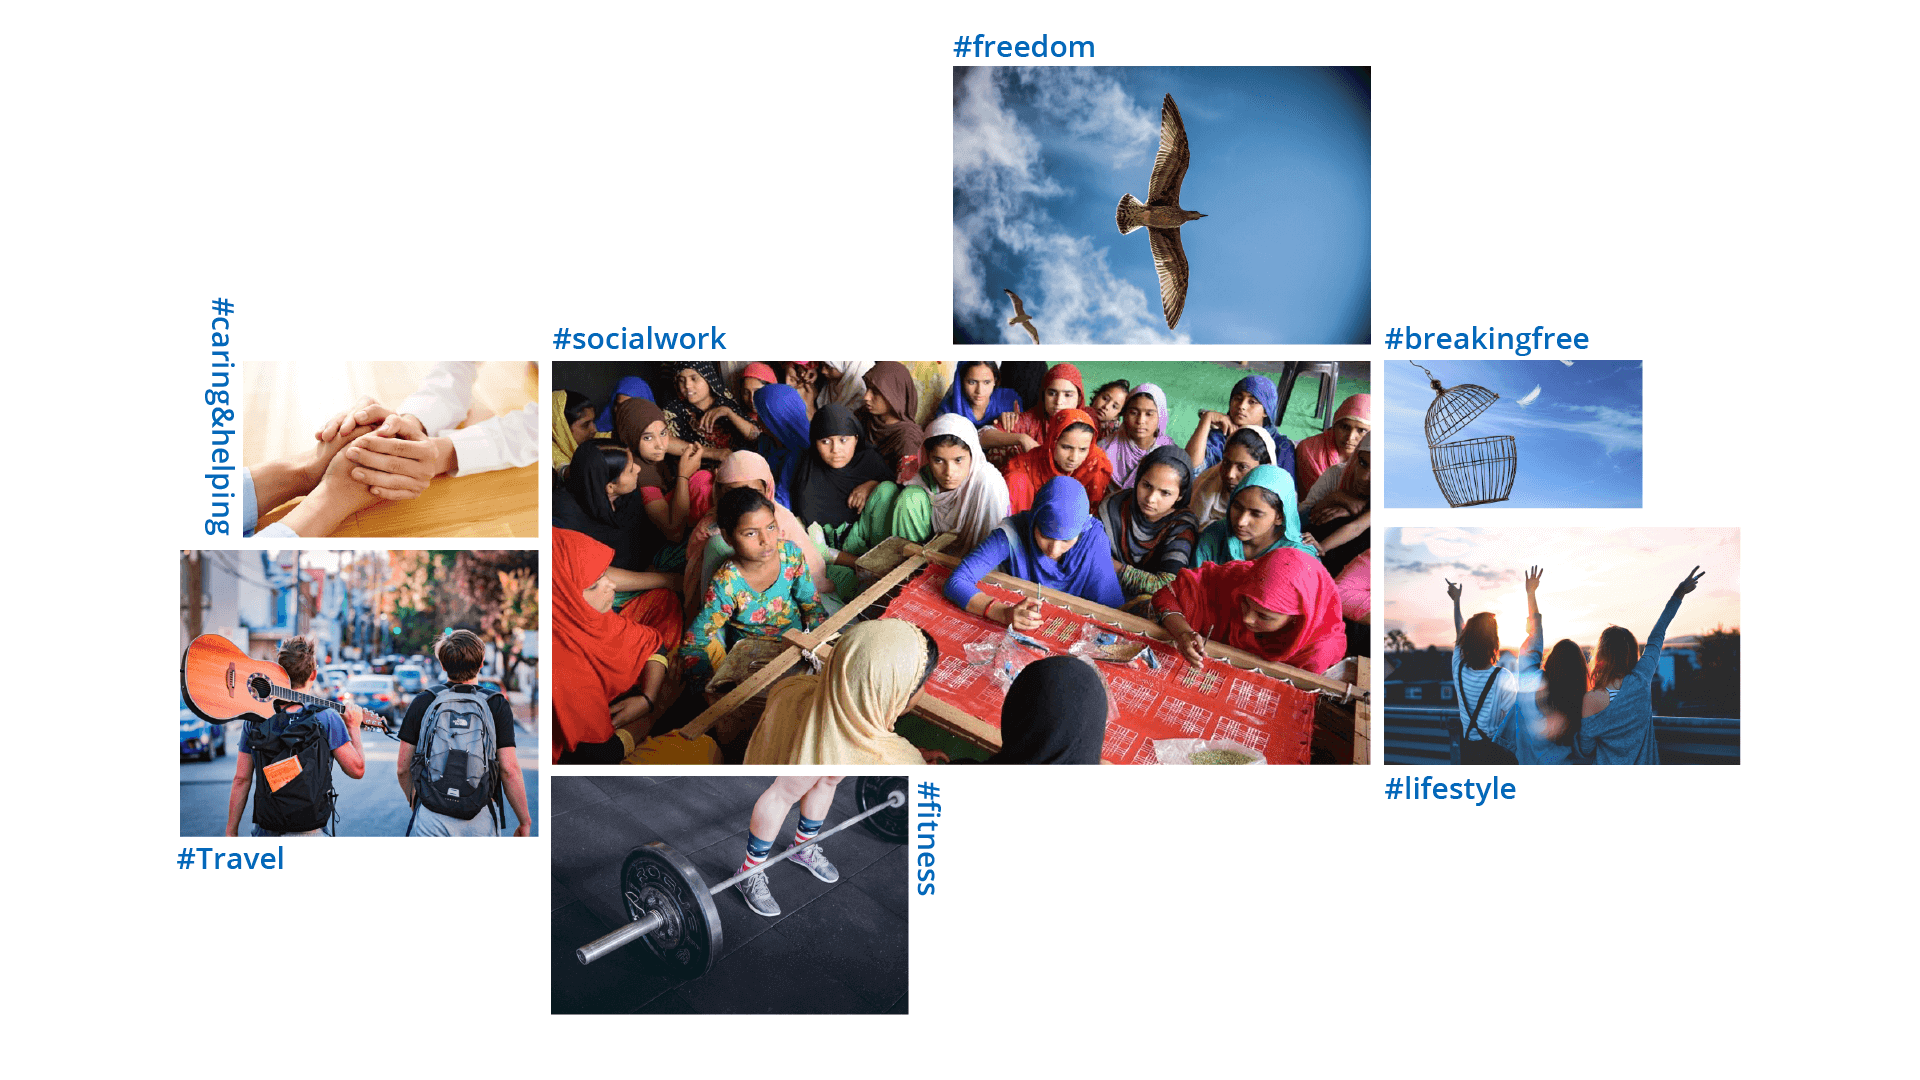 A moodboard for Hum Azad Hai, which also has the brand's keywords